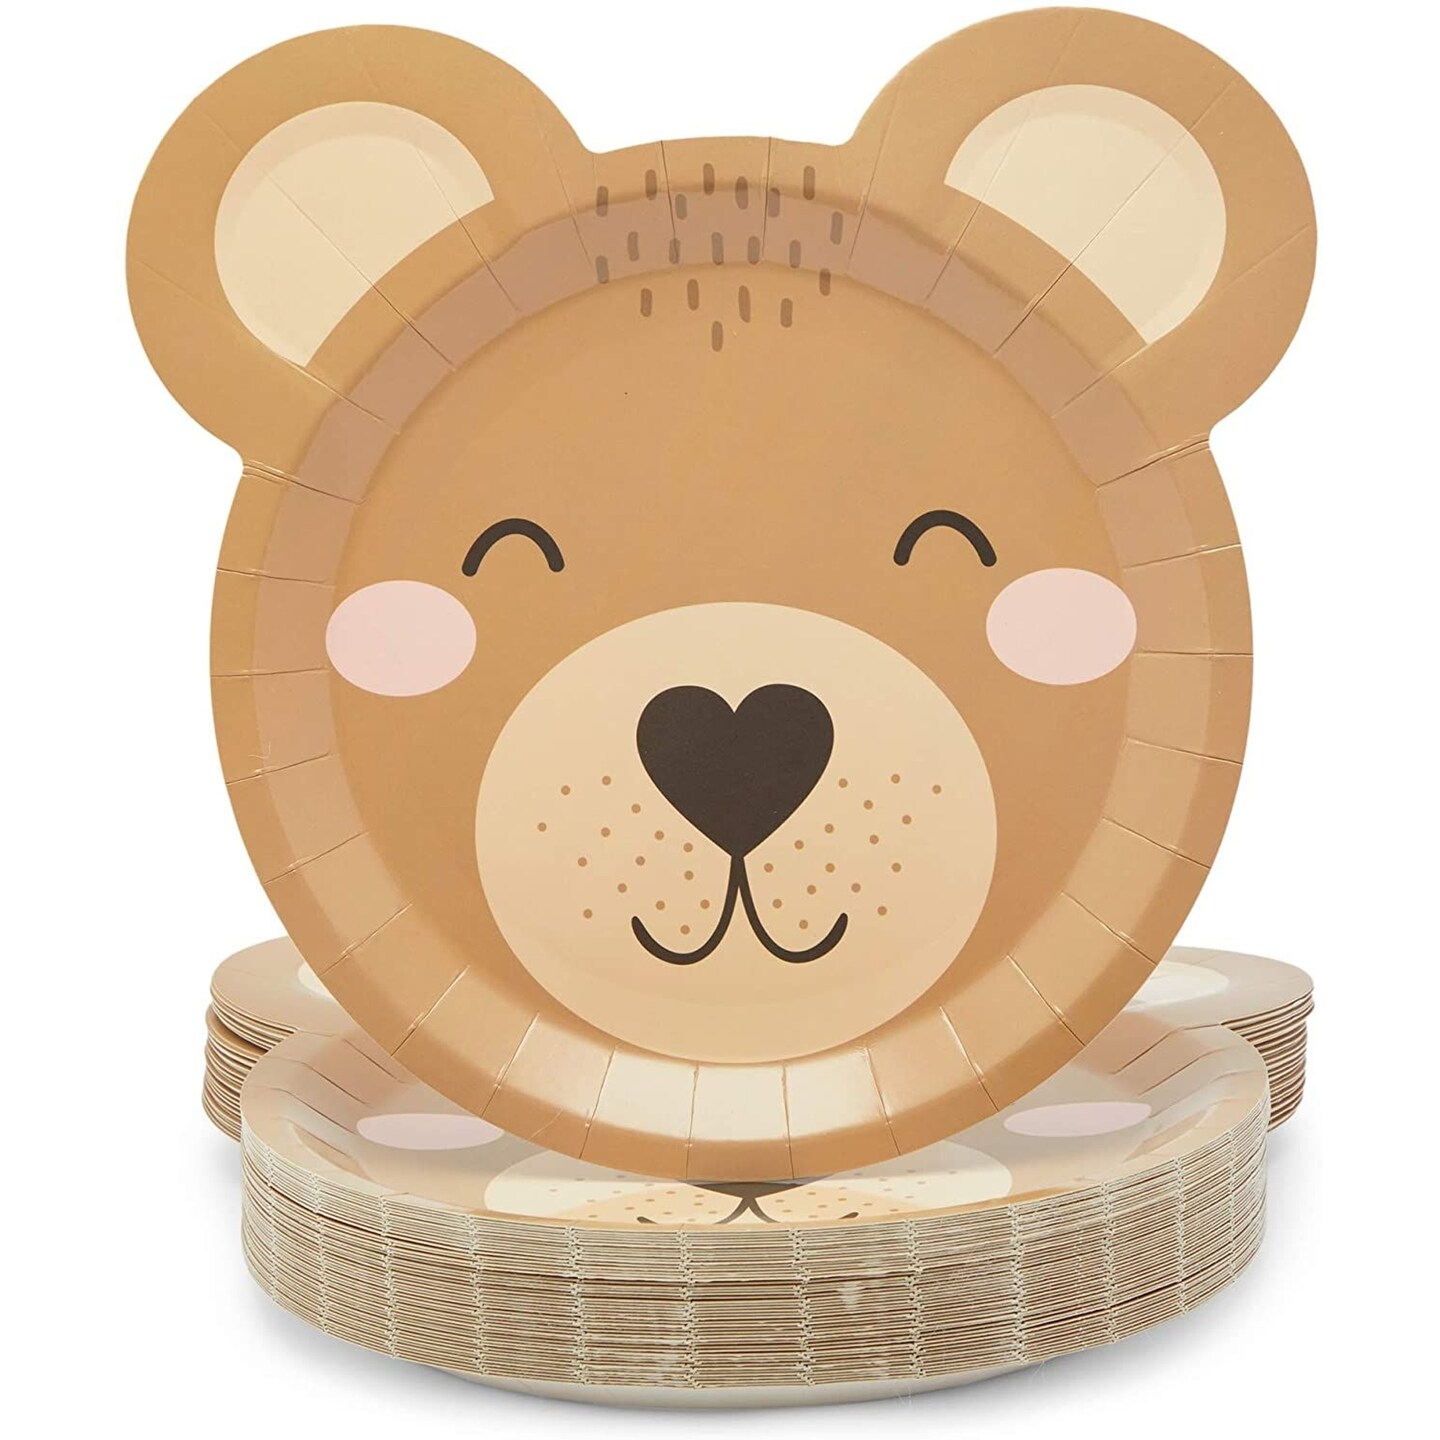 48-Pack Teddy Bear Paper Plates for Baby Shower Decorations (11x11 in)